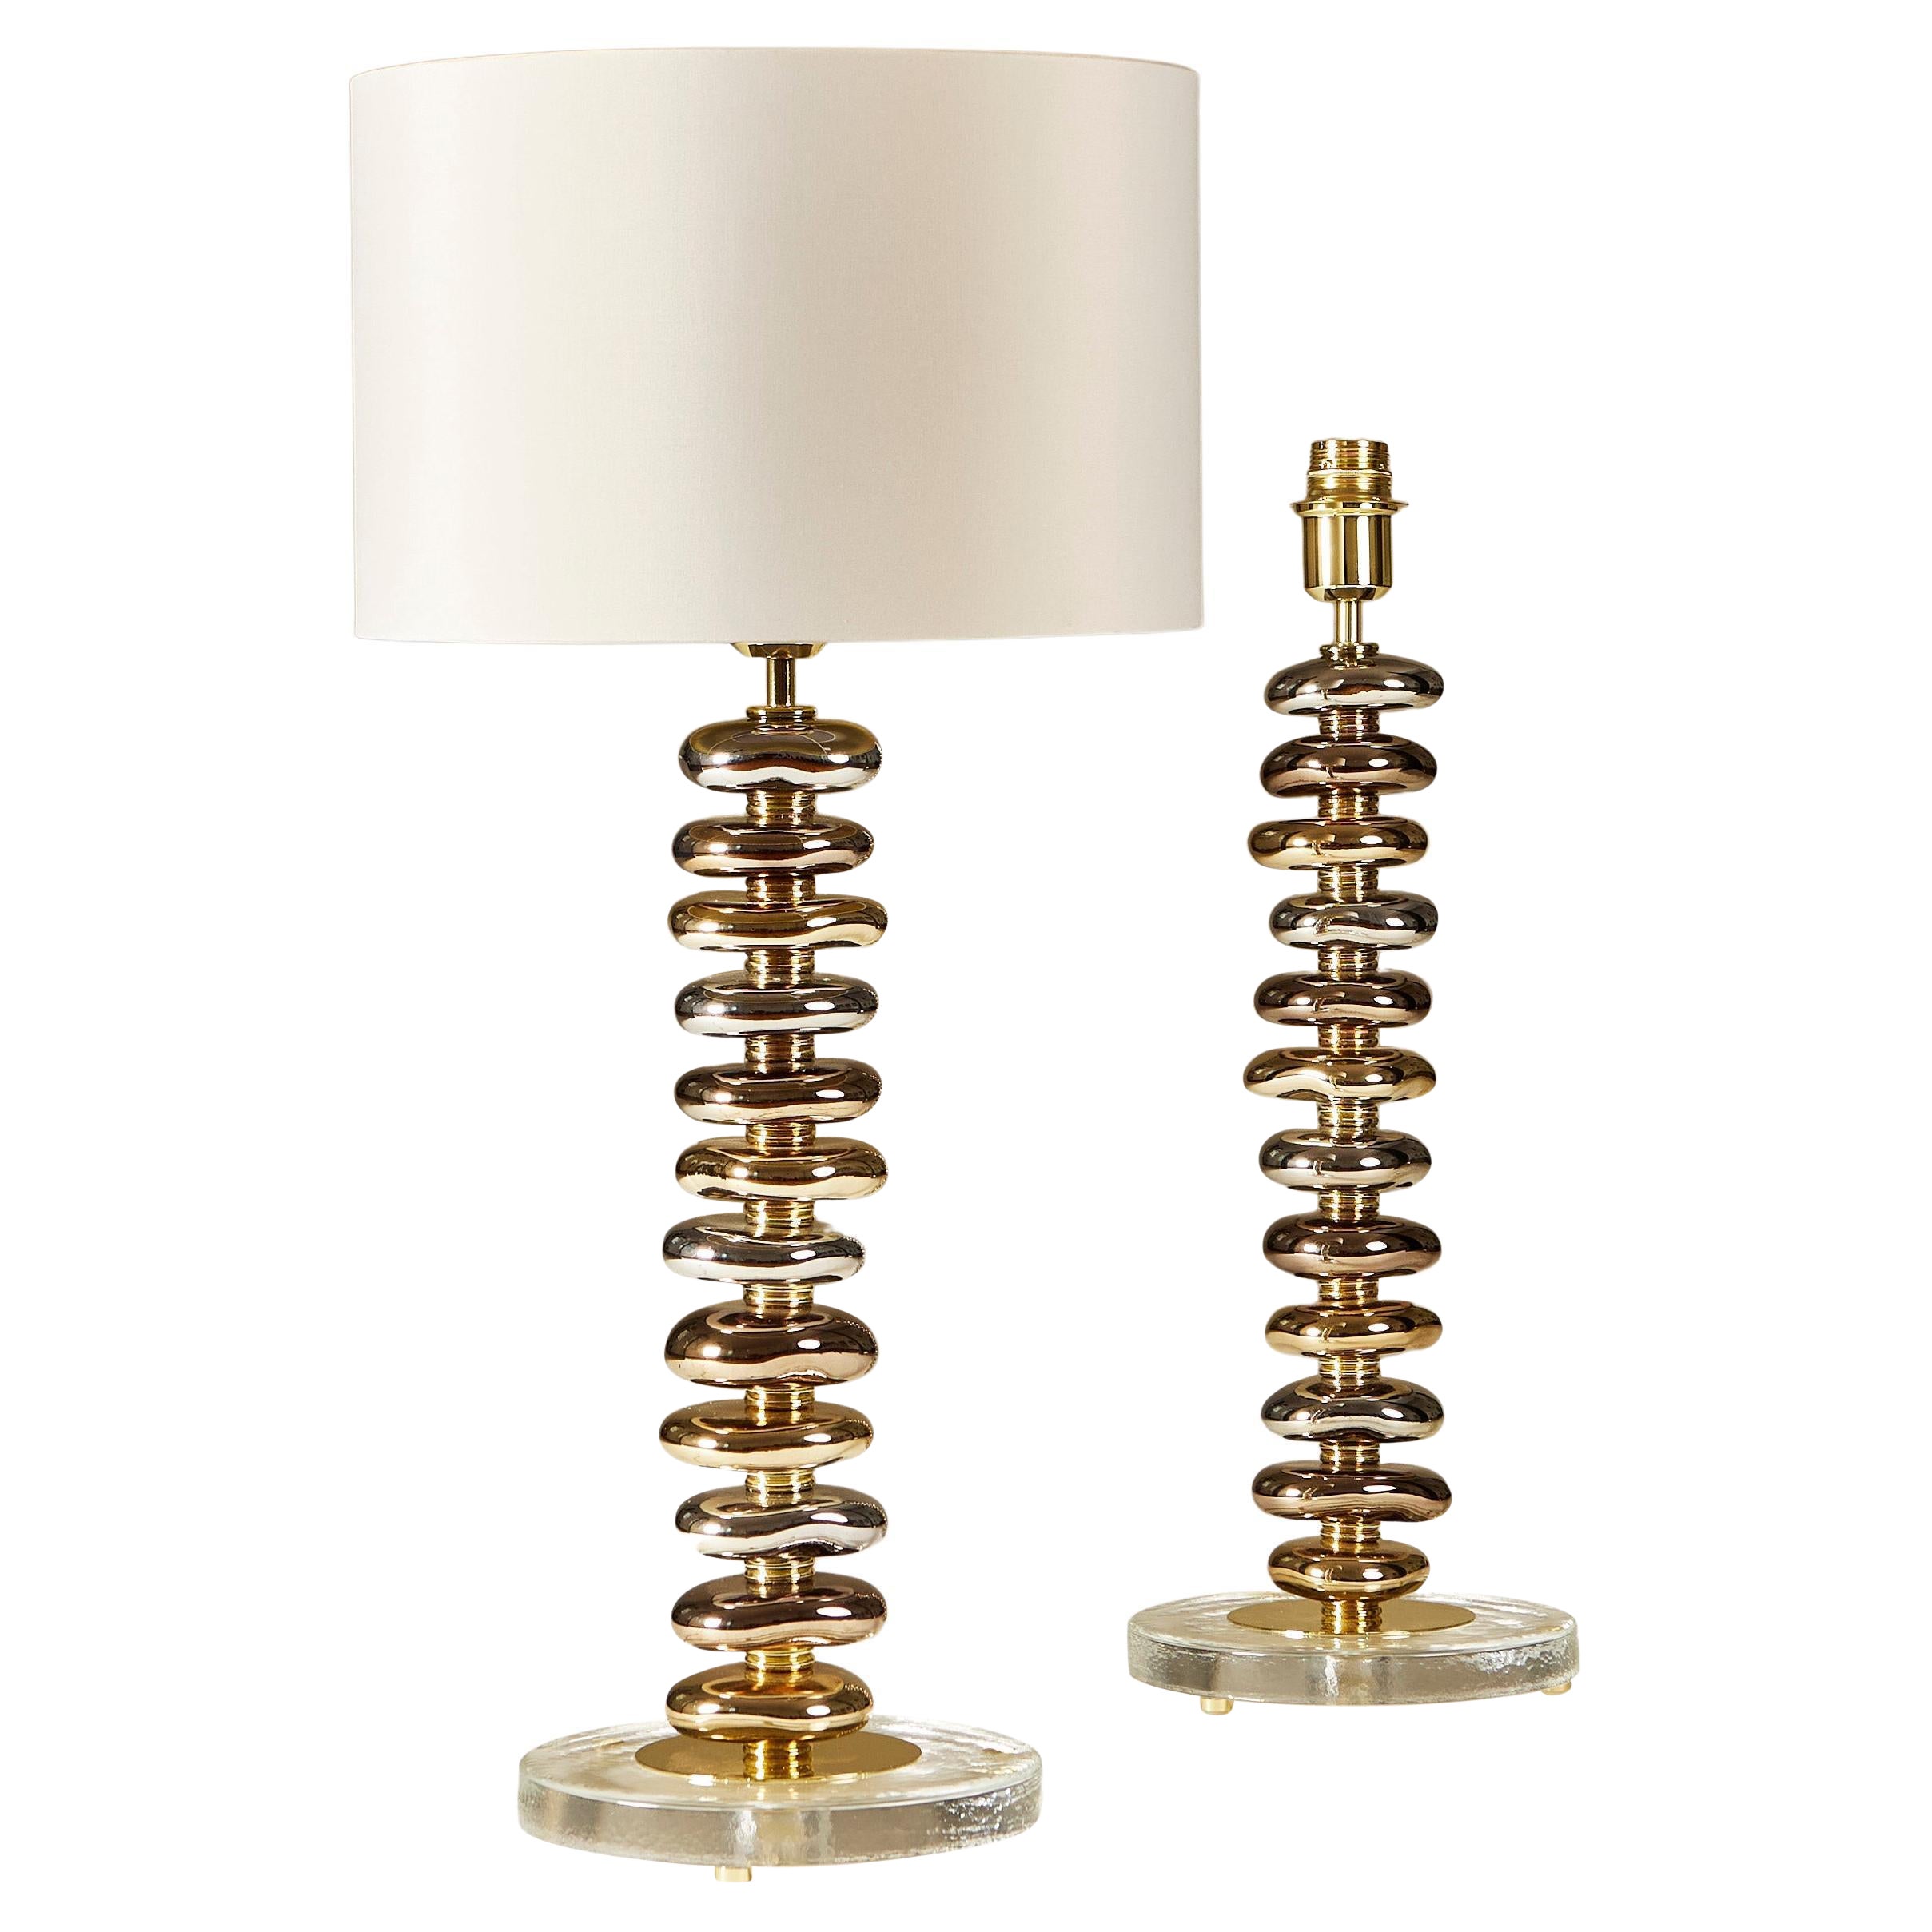 Pair of Tall Murano Glass Metallic and Brass ‘Pebble’ Table Lamps